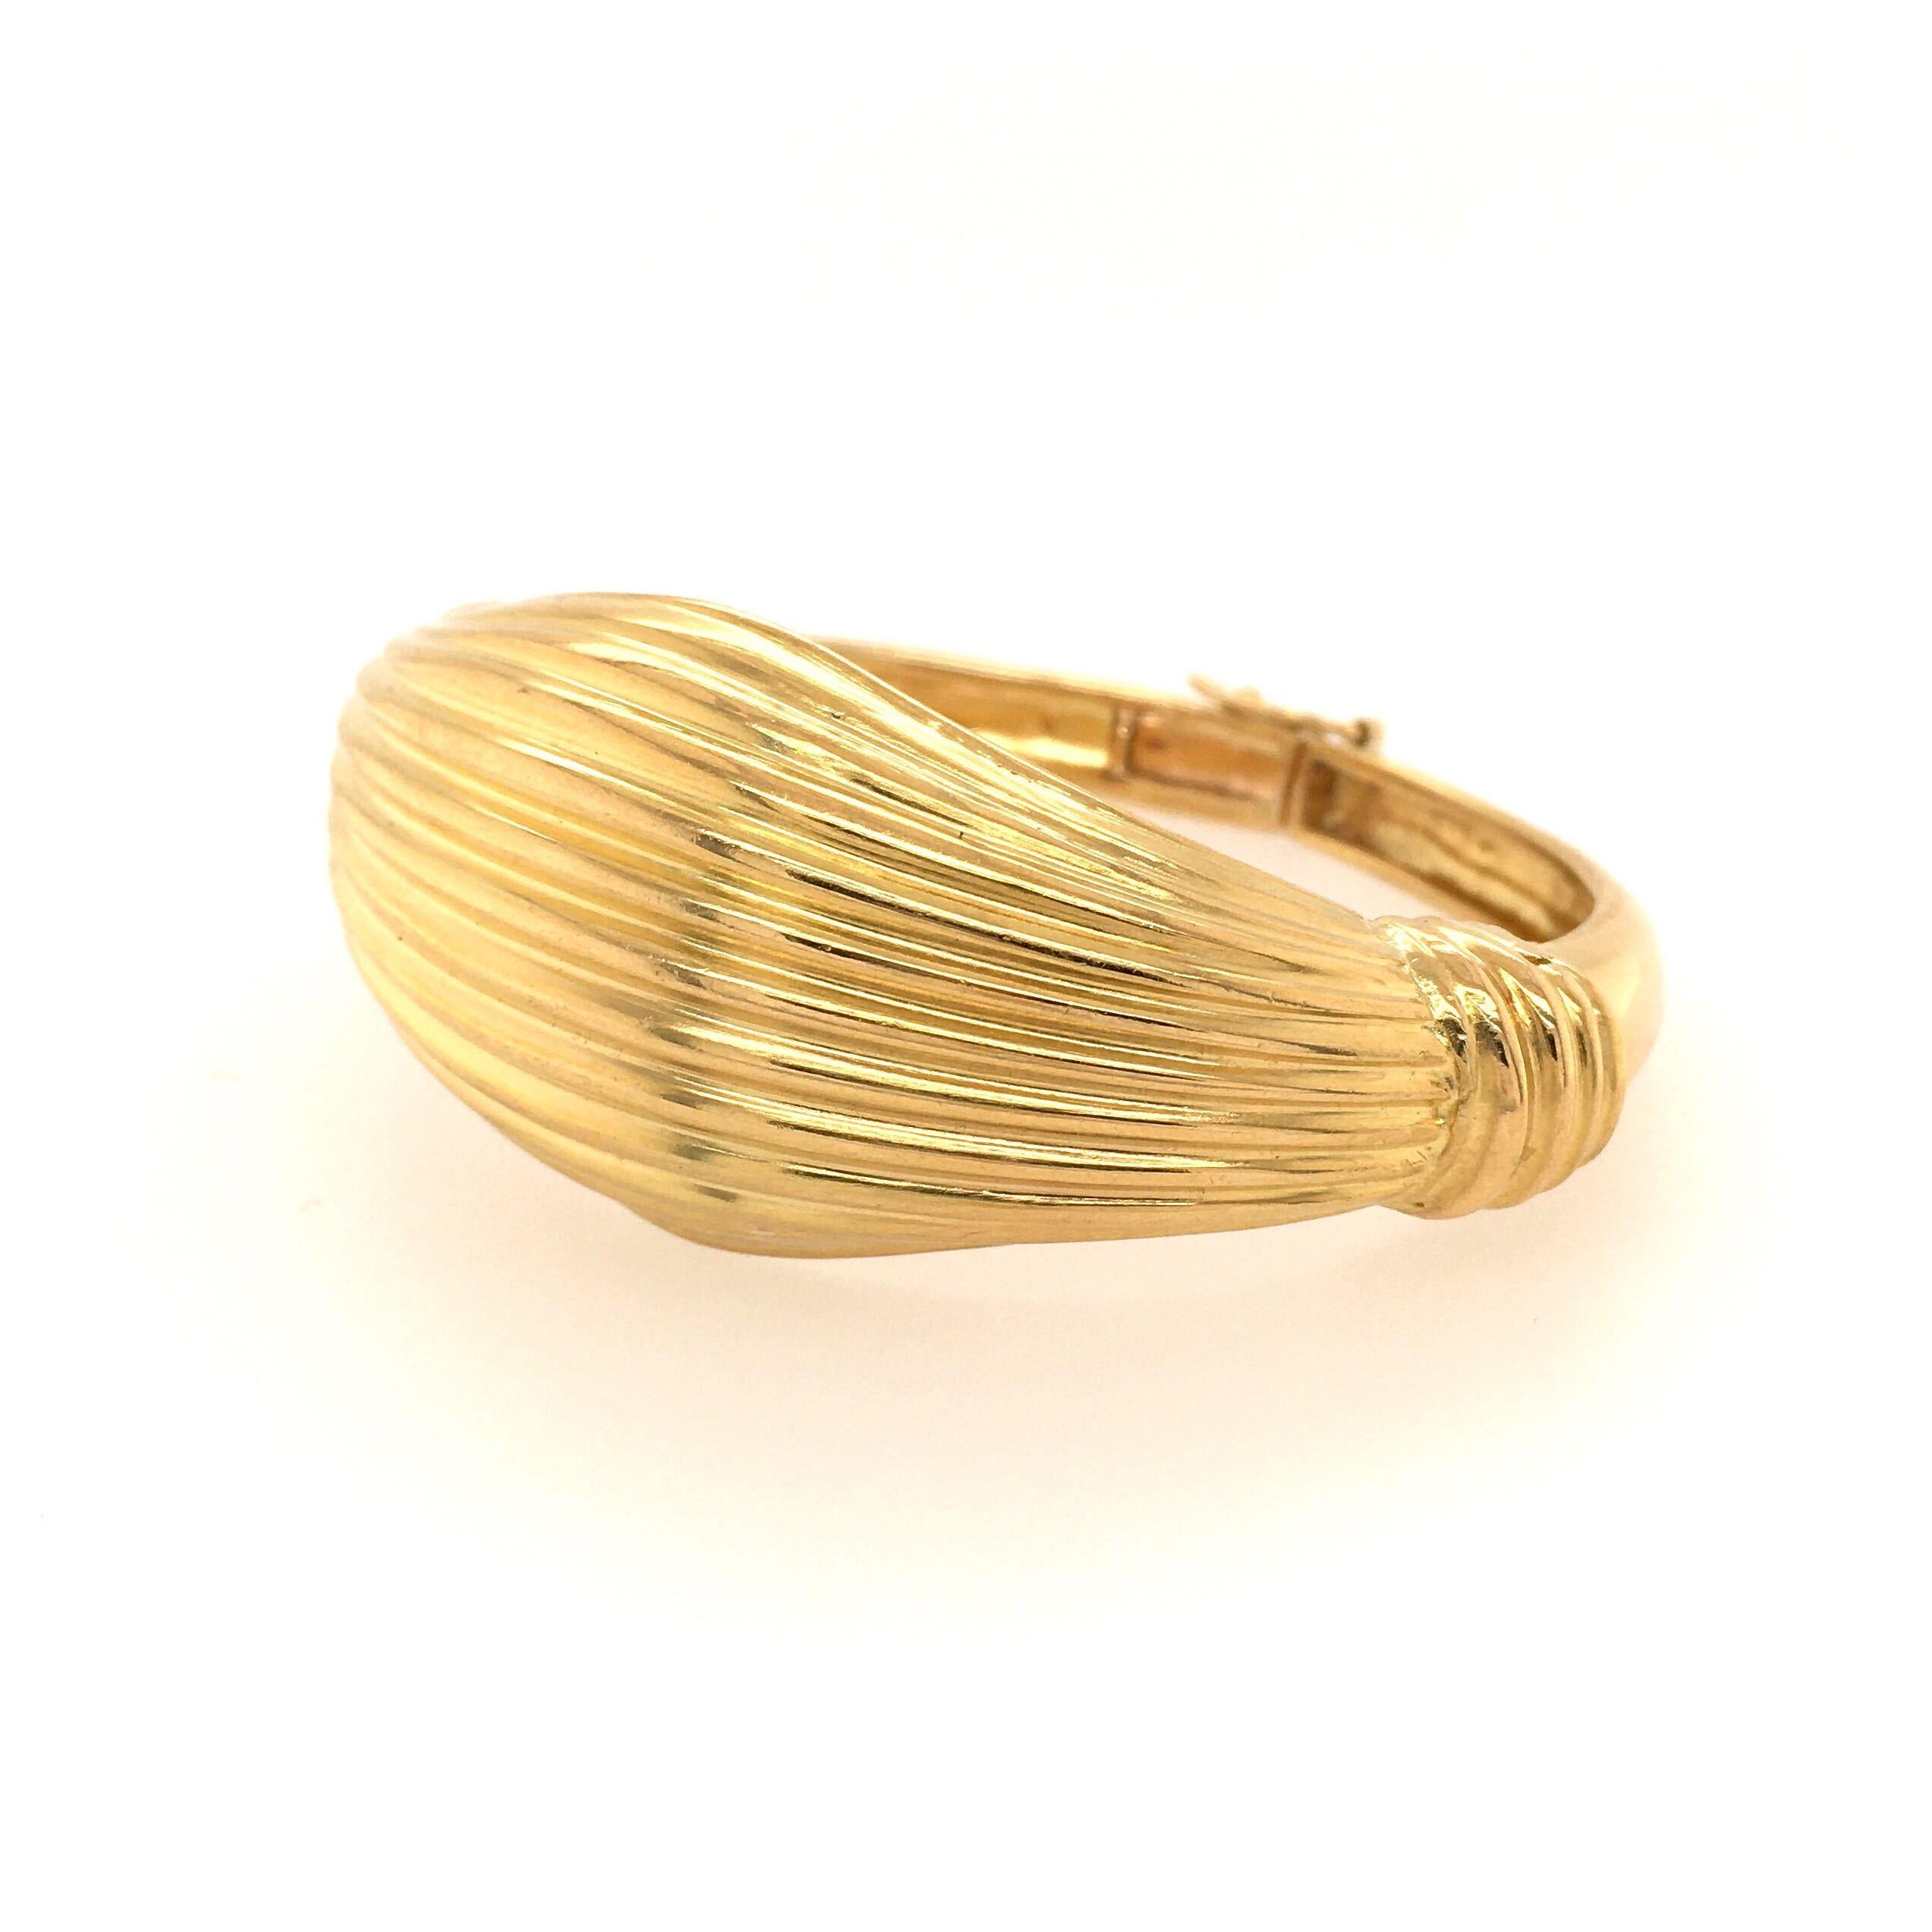 A 22 karat yellow gold bracelet. Lalaounis. The hinged bangle designed as  fluted gold bombe panel, tapering to a narrower band. At widest bracelet measures 1 1/4 inches, inside measurement is approximately 7 inches, gross weight is approximately